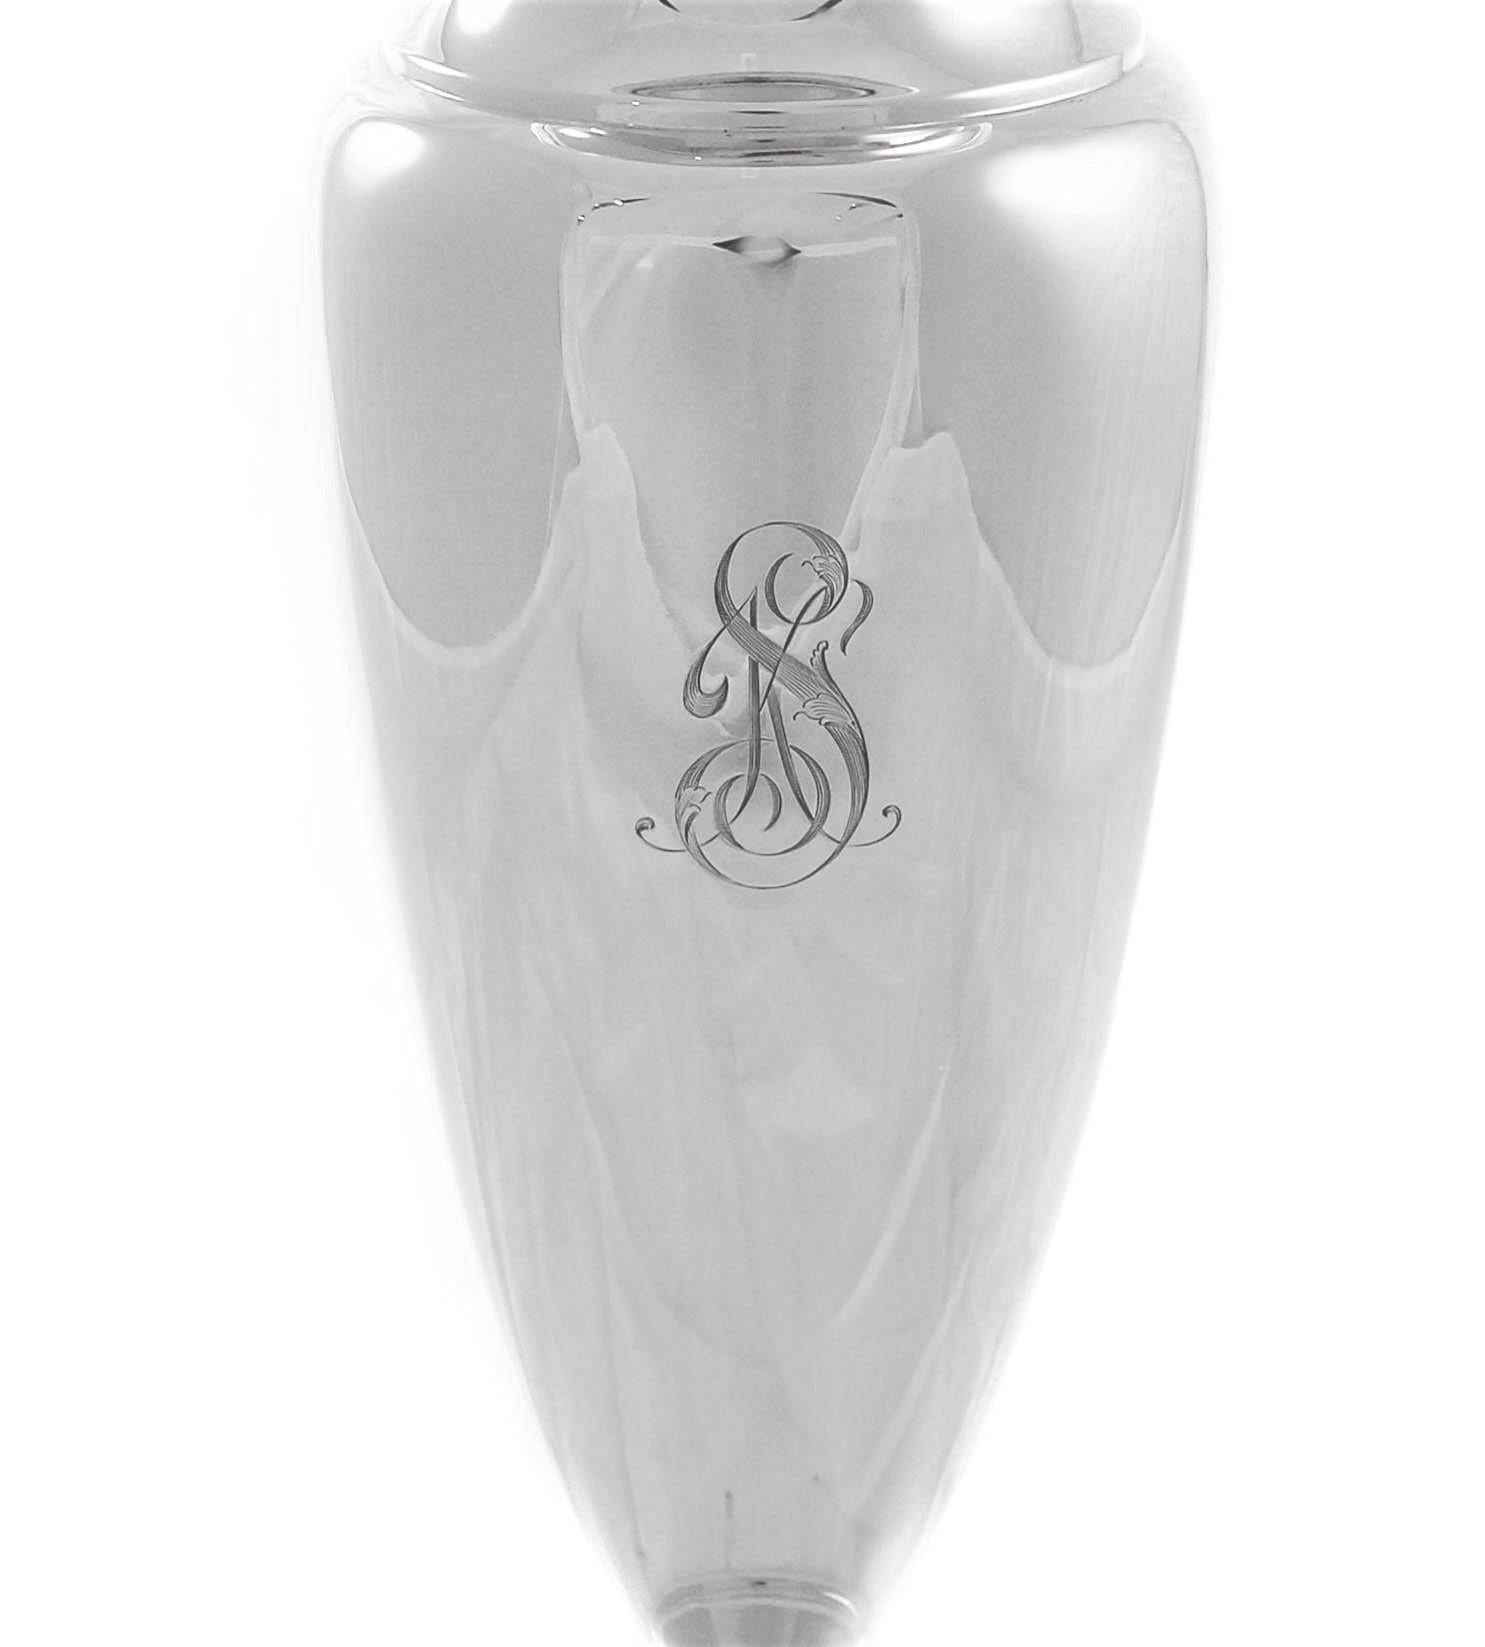 We are delighted to offer this sterling silver vase by Frank W. Smith Silver Company of Massachusetts. It is an elegant and understated piece and rather unusual in that it was unadorned which was uncommon for the time. Notice the simple shape and